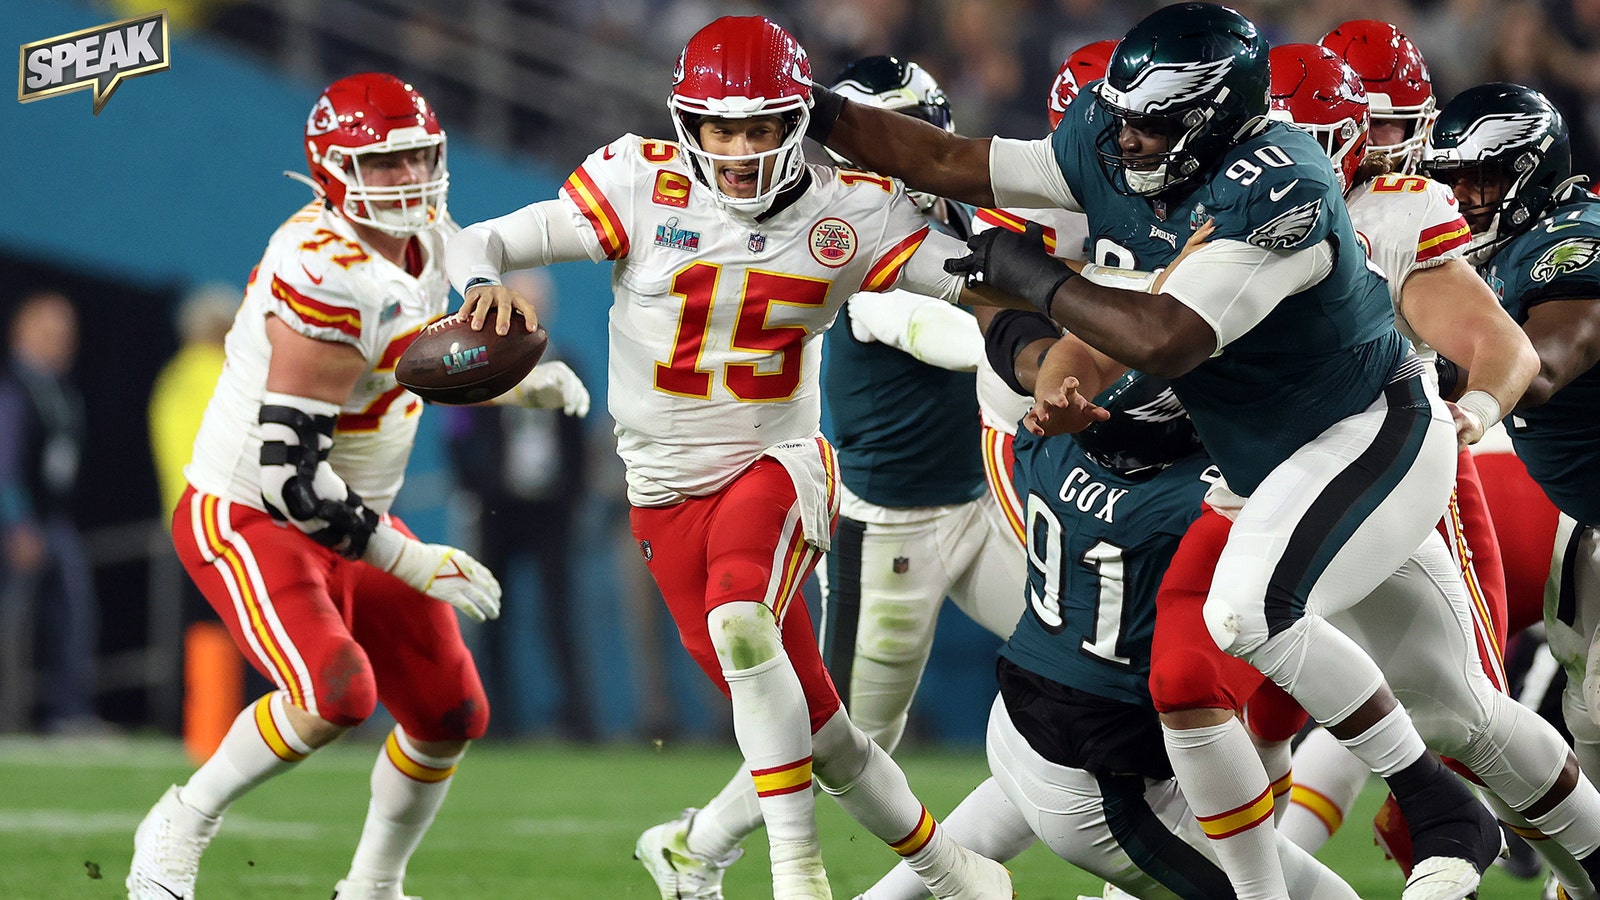 Chiefs host Eagles in a Super Bowl LVII rematch: Who needs the win more? 